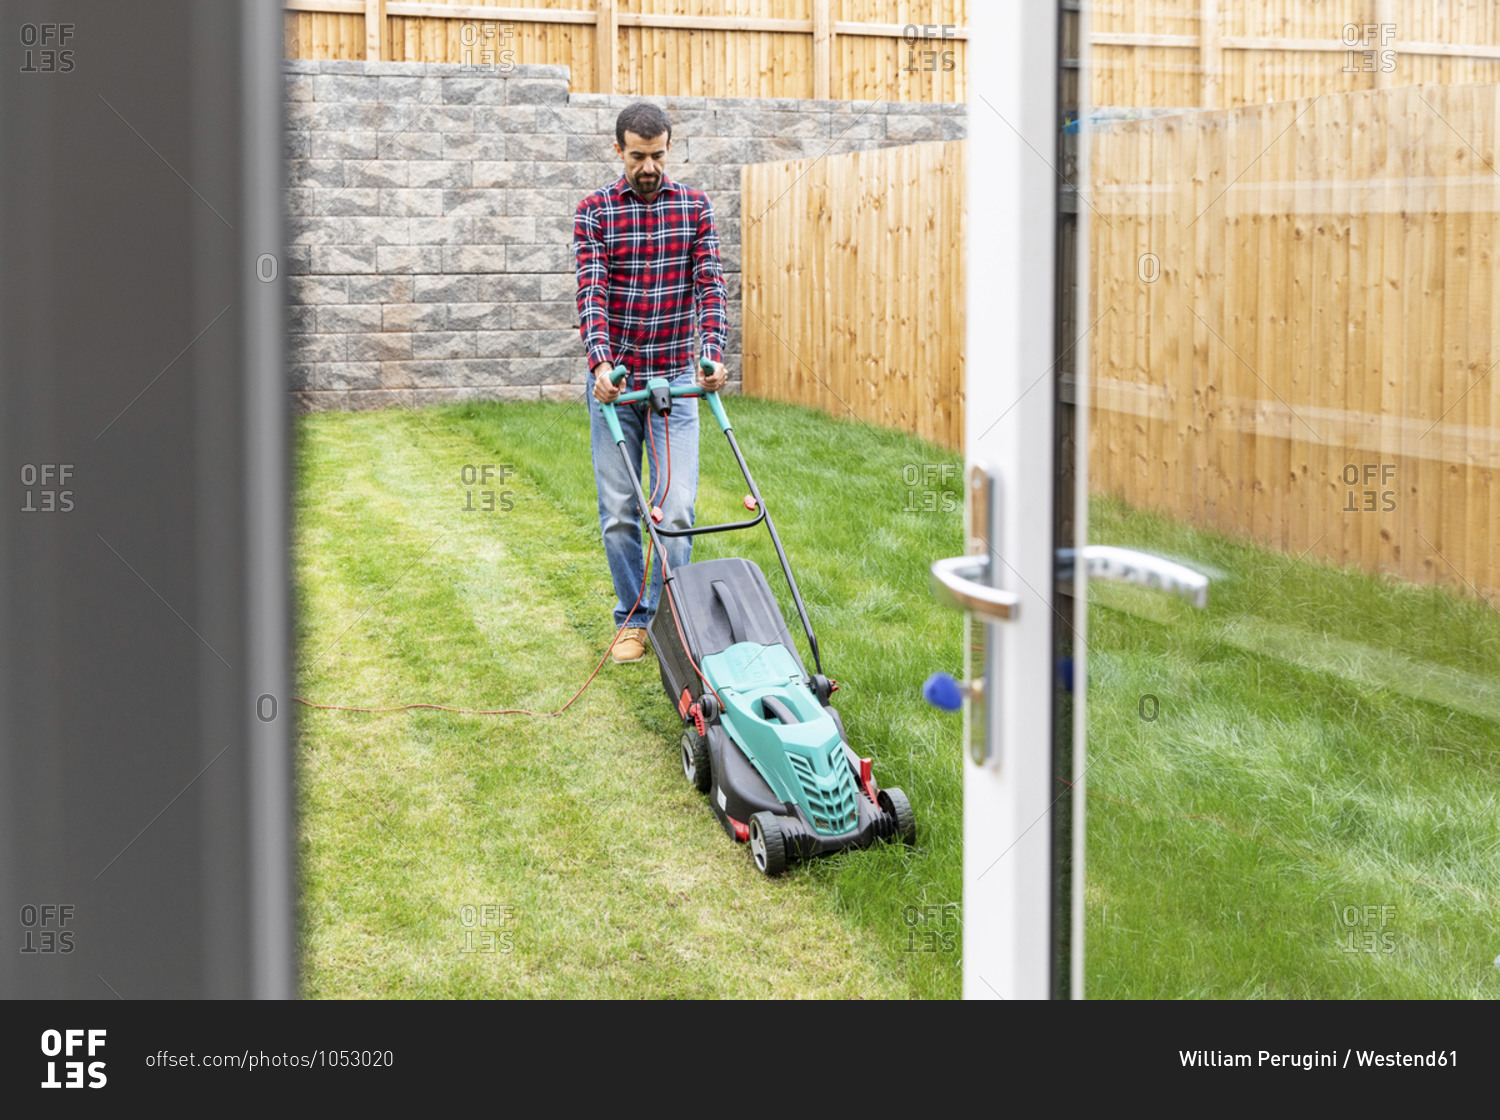 Man mowing lawn with push lawn mower at backyard